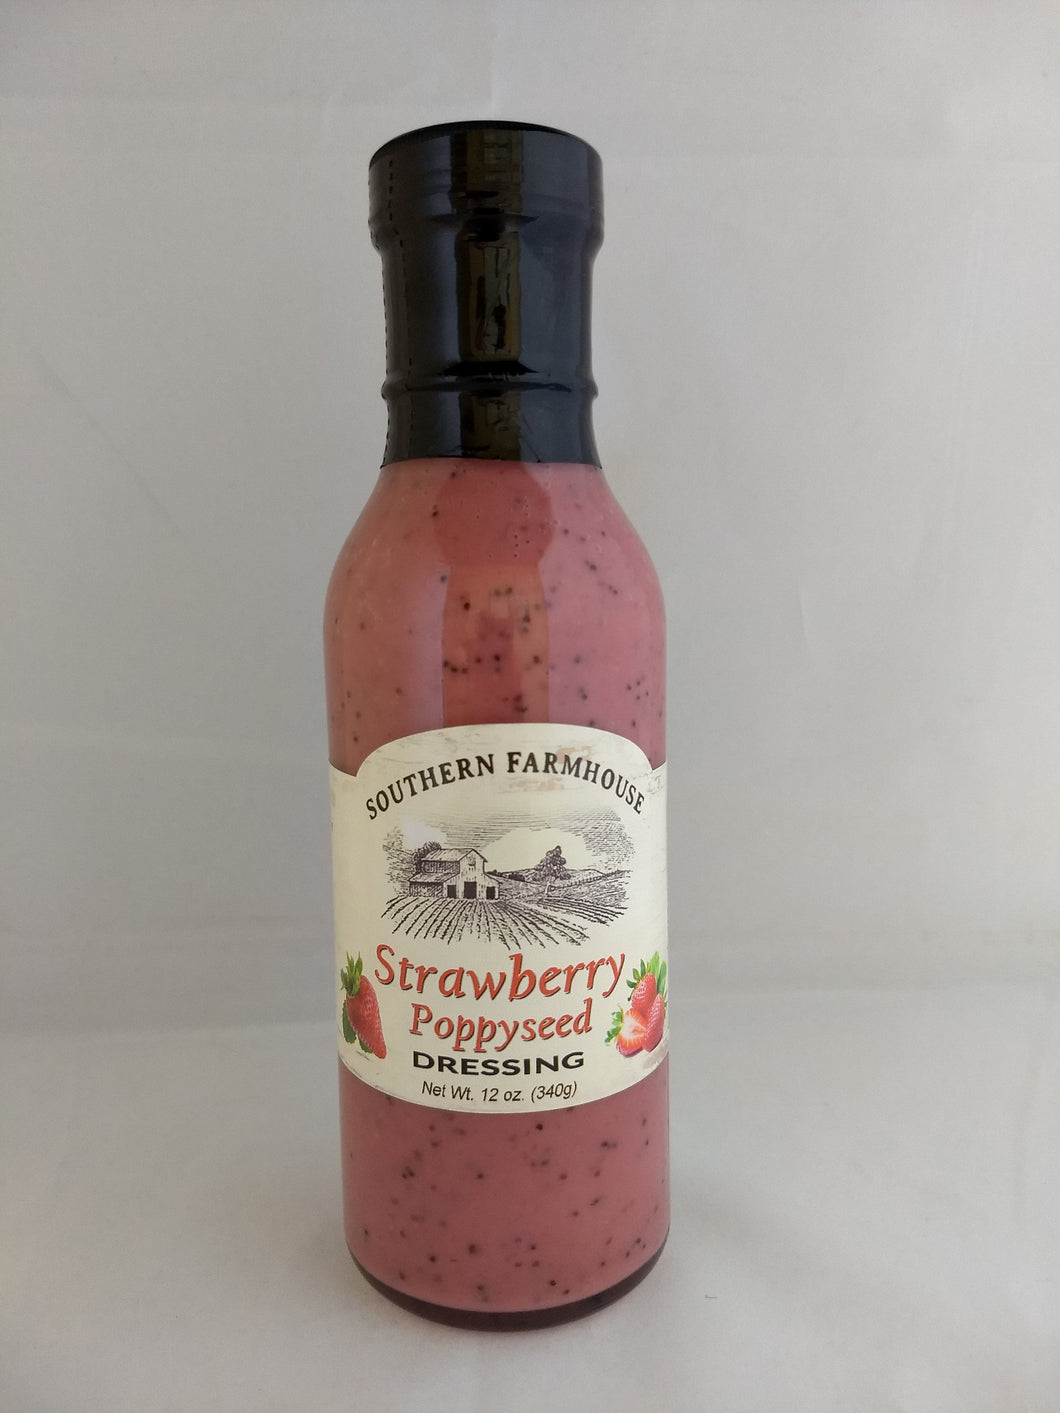 Southern Farmhouse Strawberry Poppyseed Dressing-3Pack